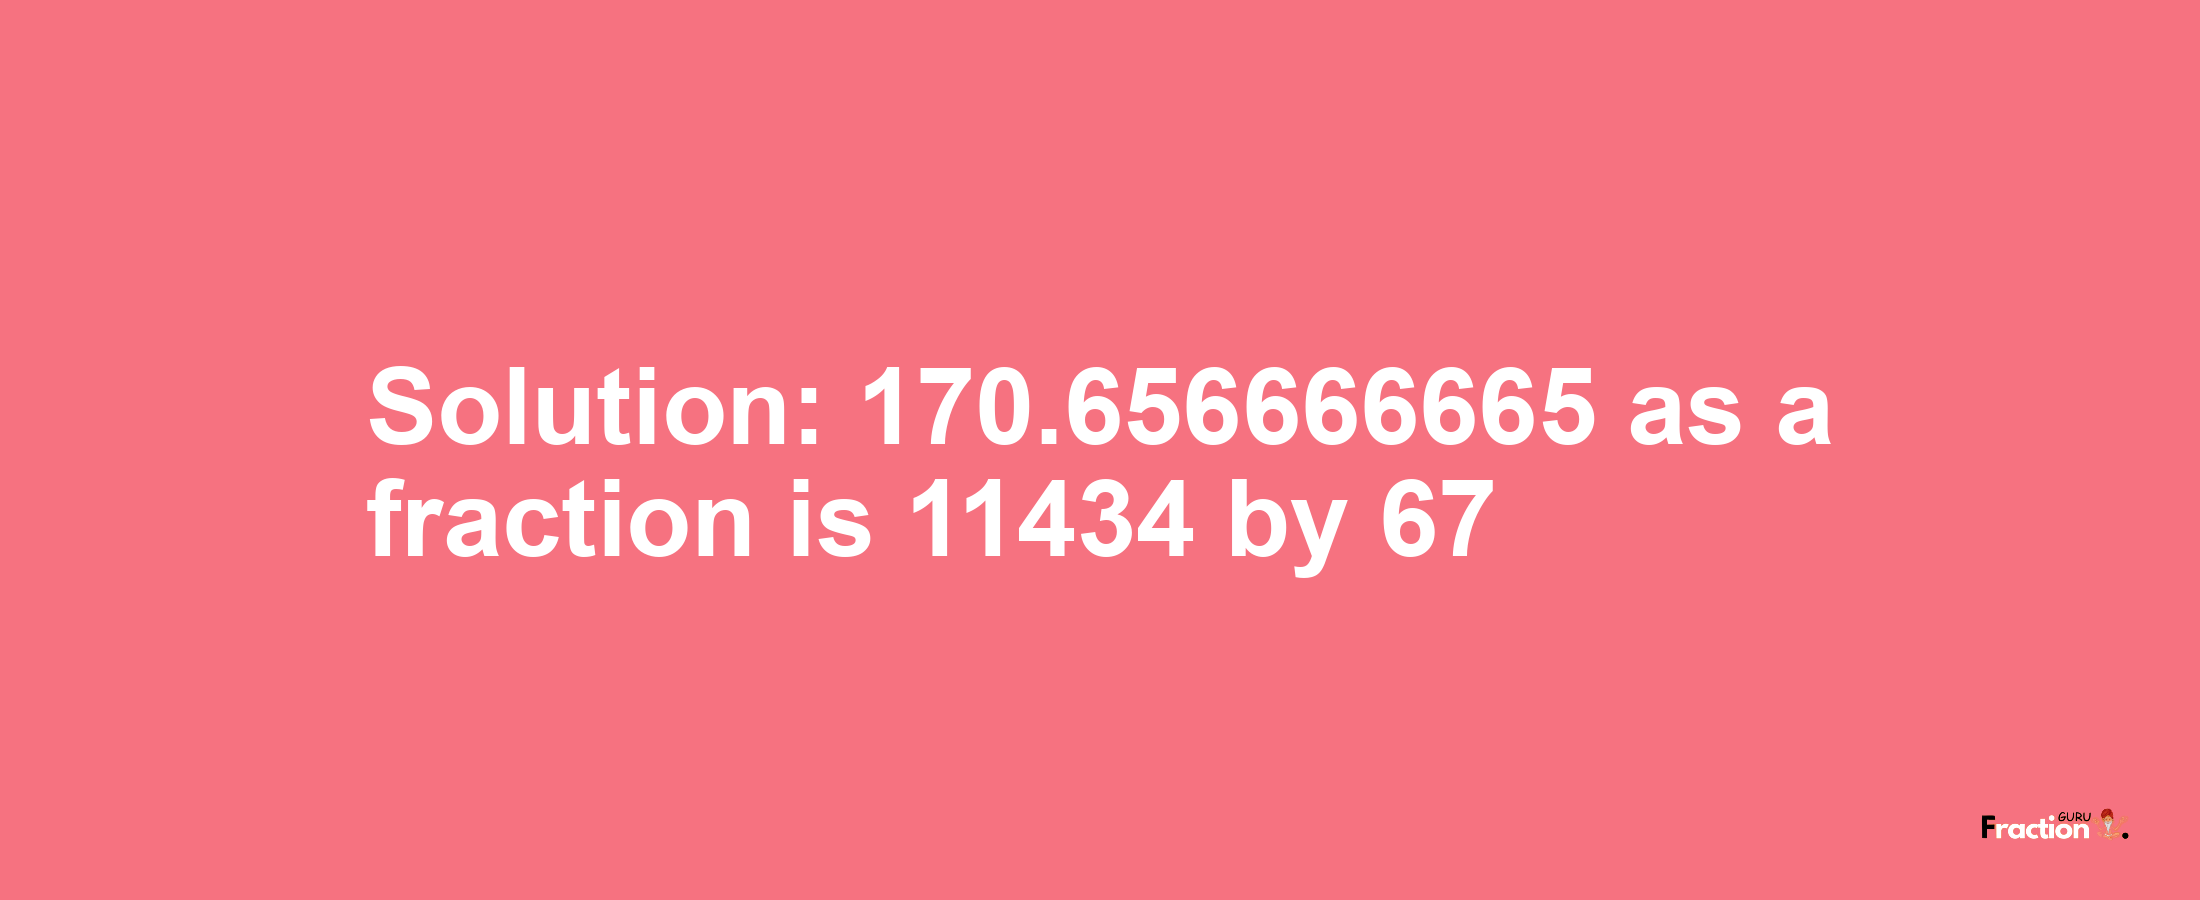 Solution:170.656666665 as a fraction is 11434/67